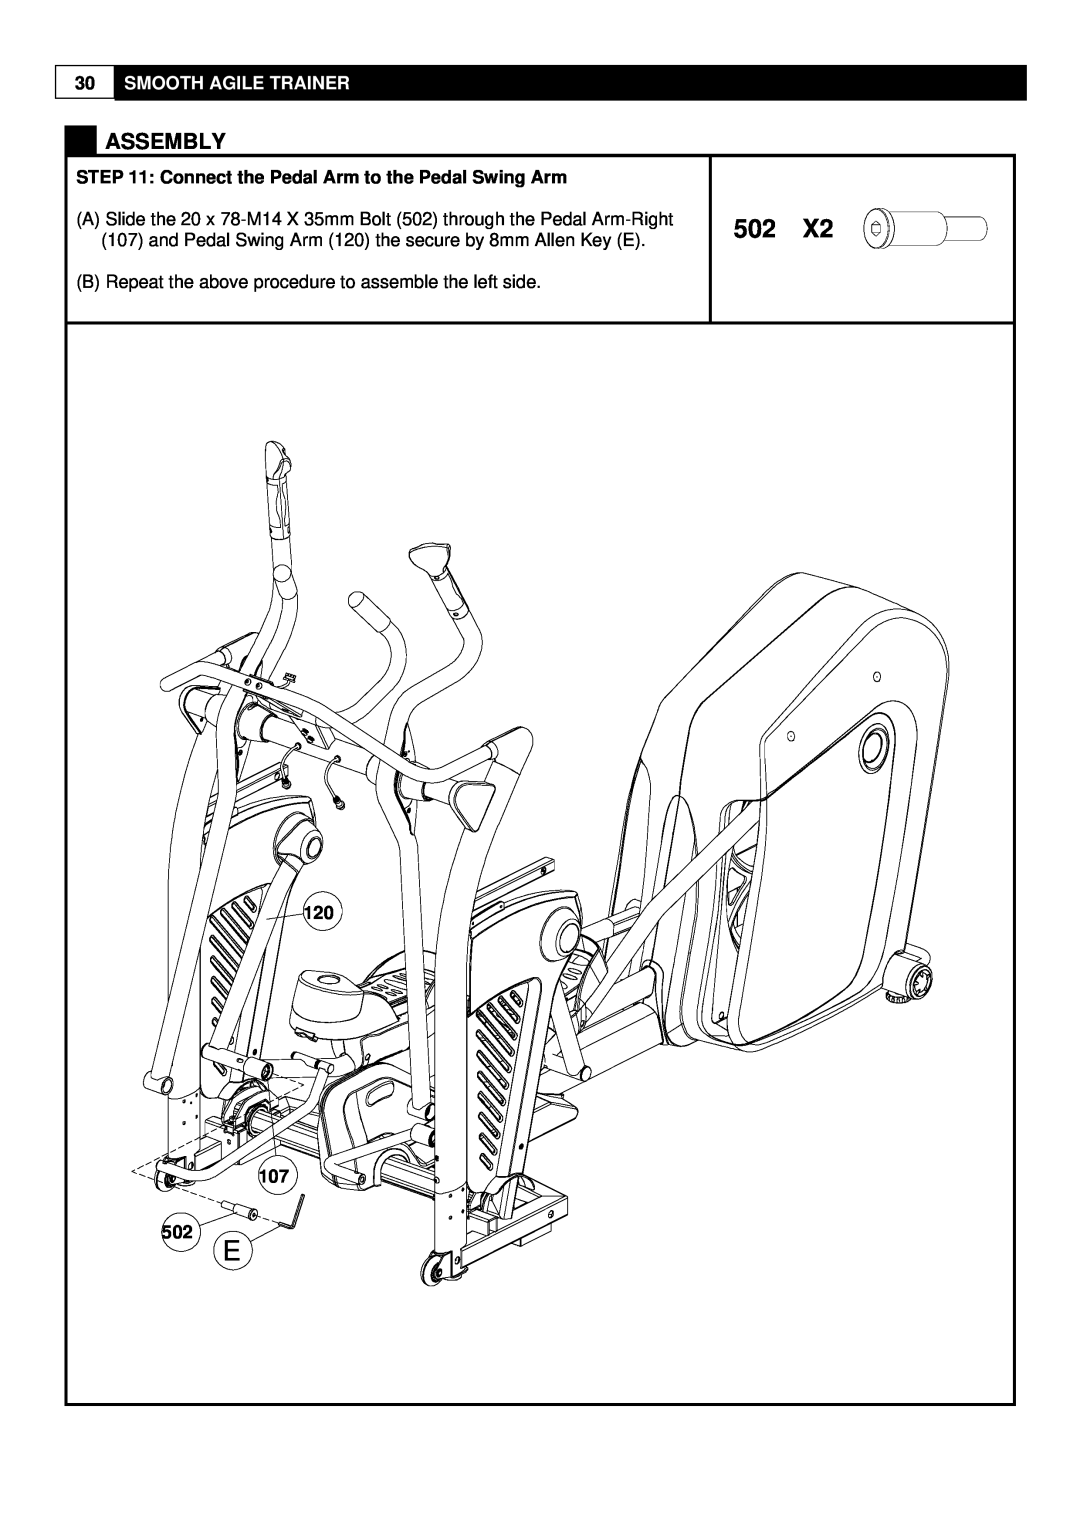 Smooth Fitness 9.25X user manual Assembly, Smooth Agile Trainer, Connect the Pedal Arm to the Pedal Swing Arm 